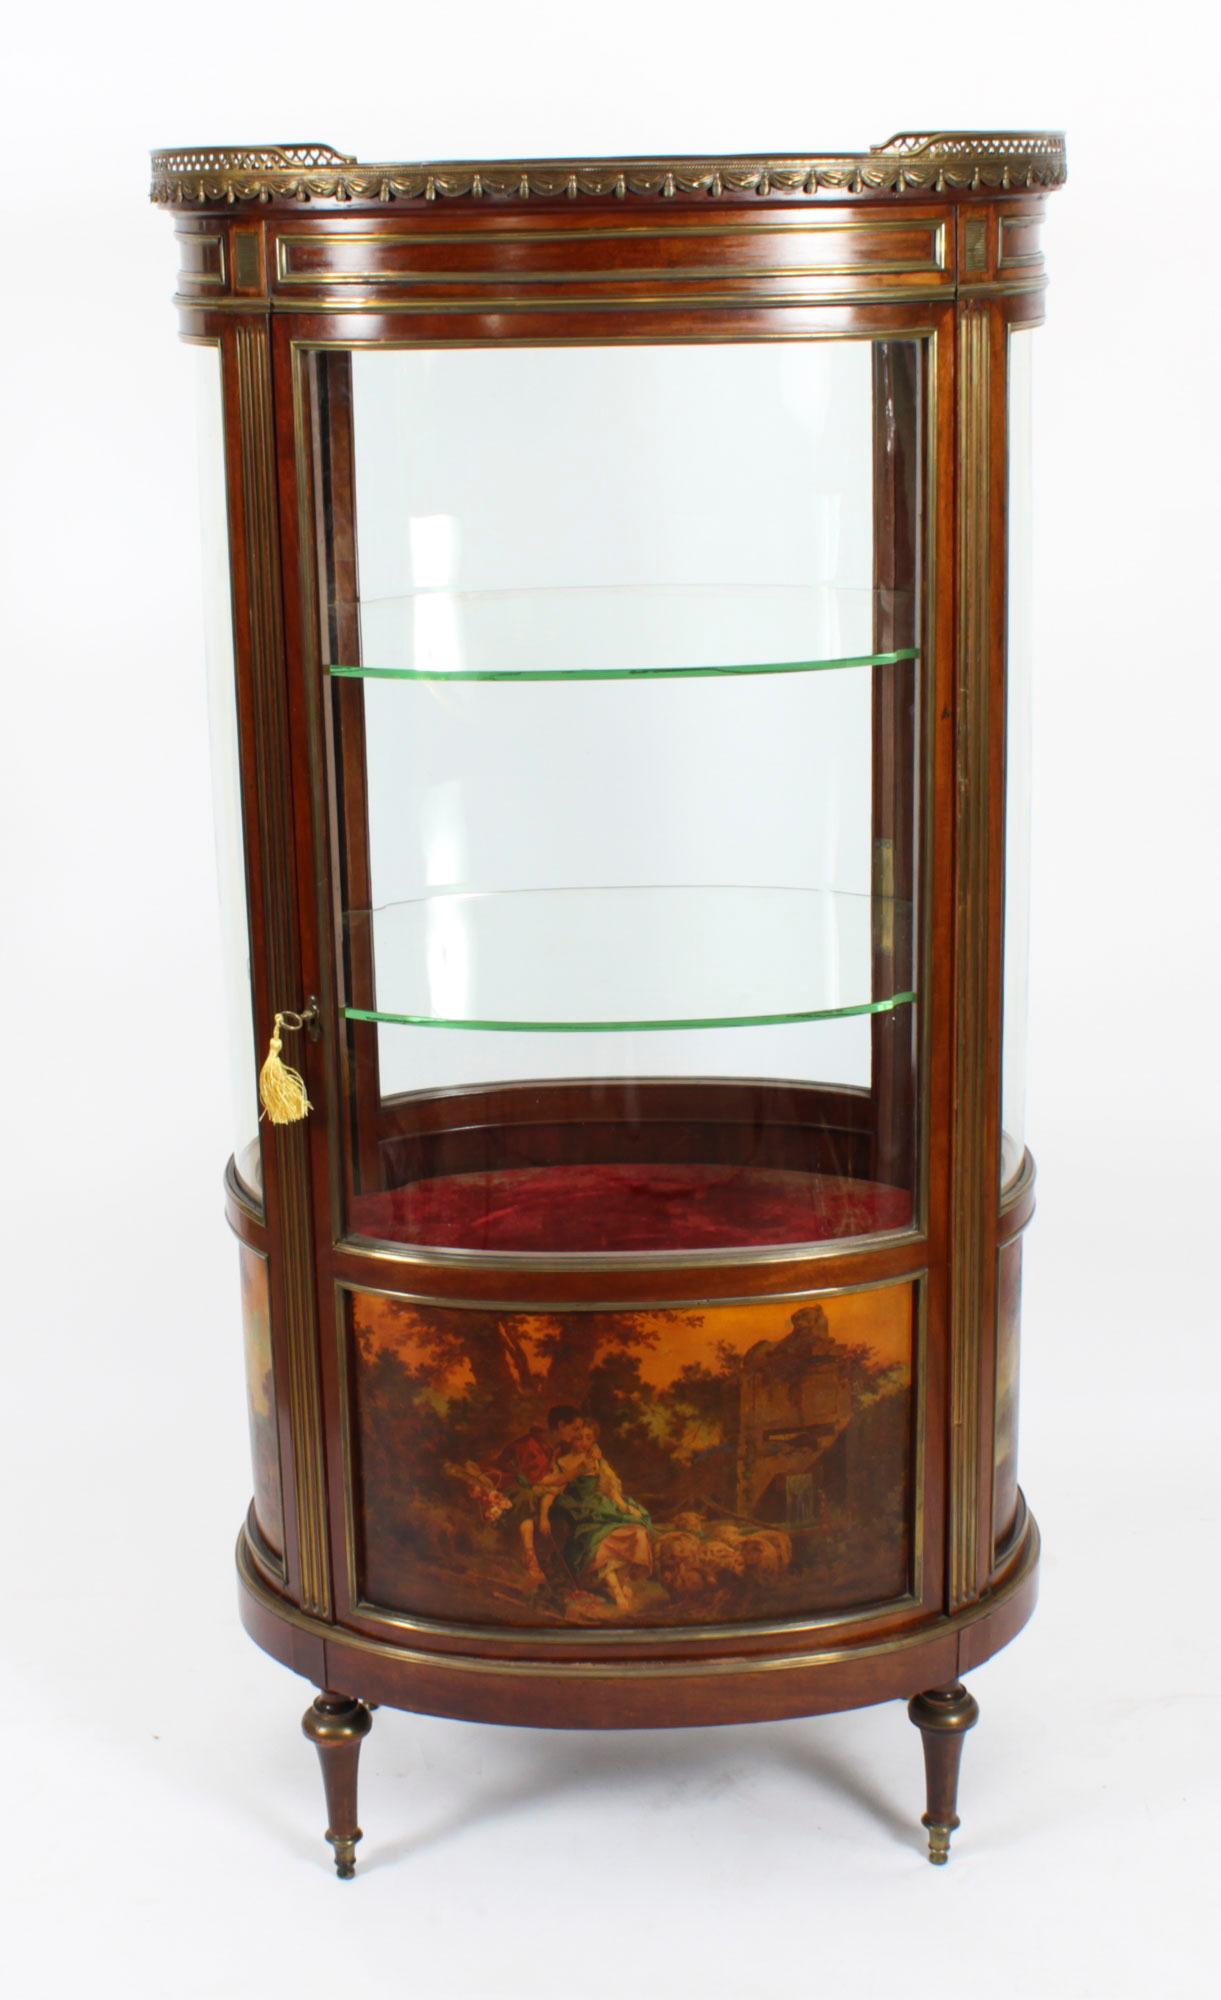 Louis XV Antique French Oval Free Standing Vernis Martin Cabinet Vitrine, 19th Century For Sale